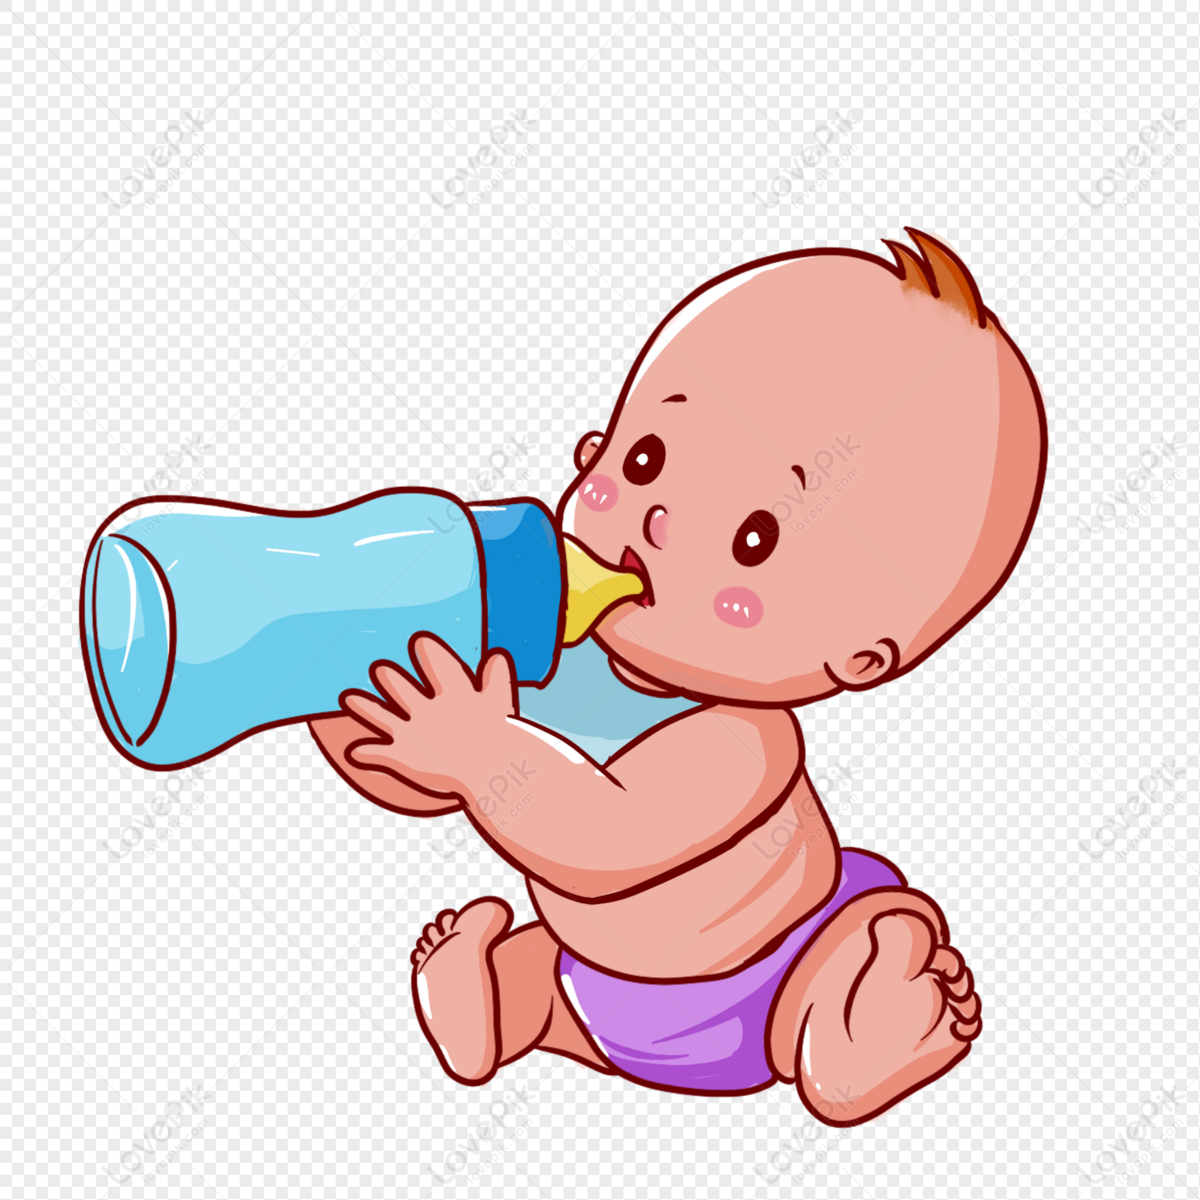 Baby Drinking Milk Free PNG And Clipart Image For Free Download - Lovepik |  401558399